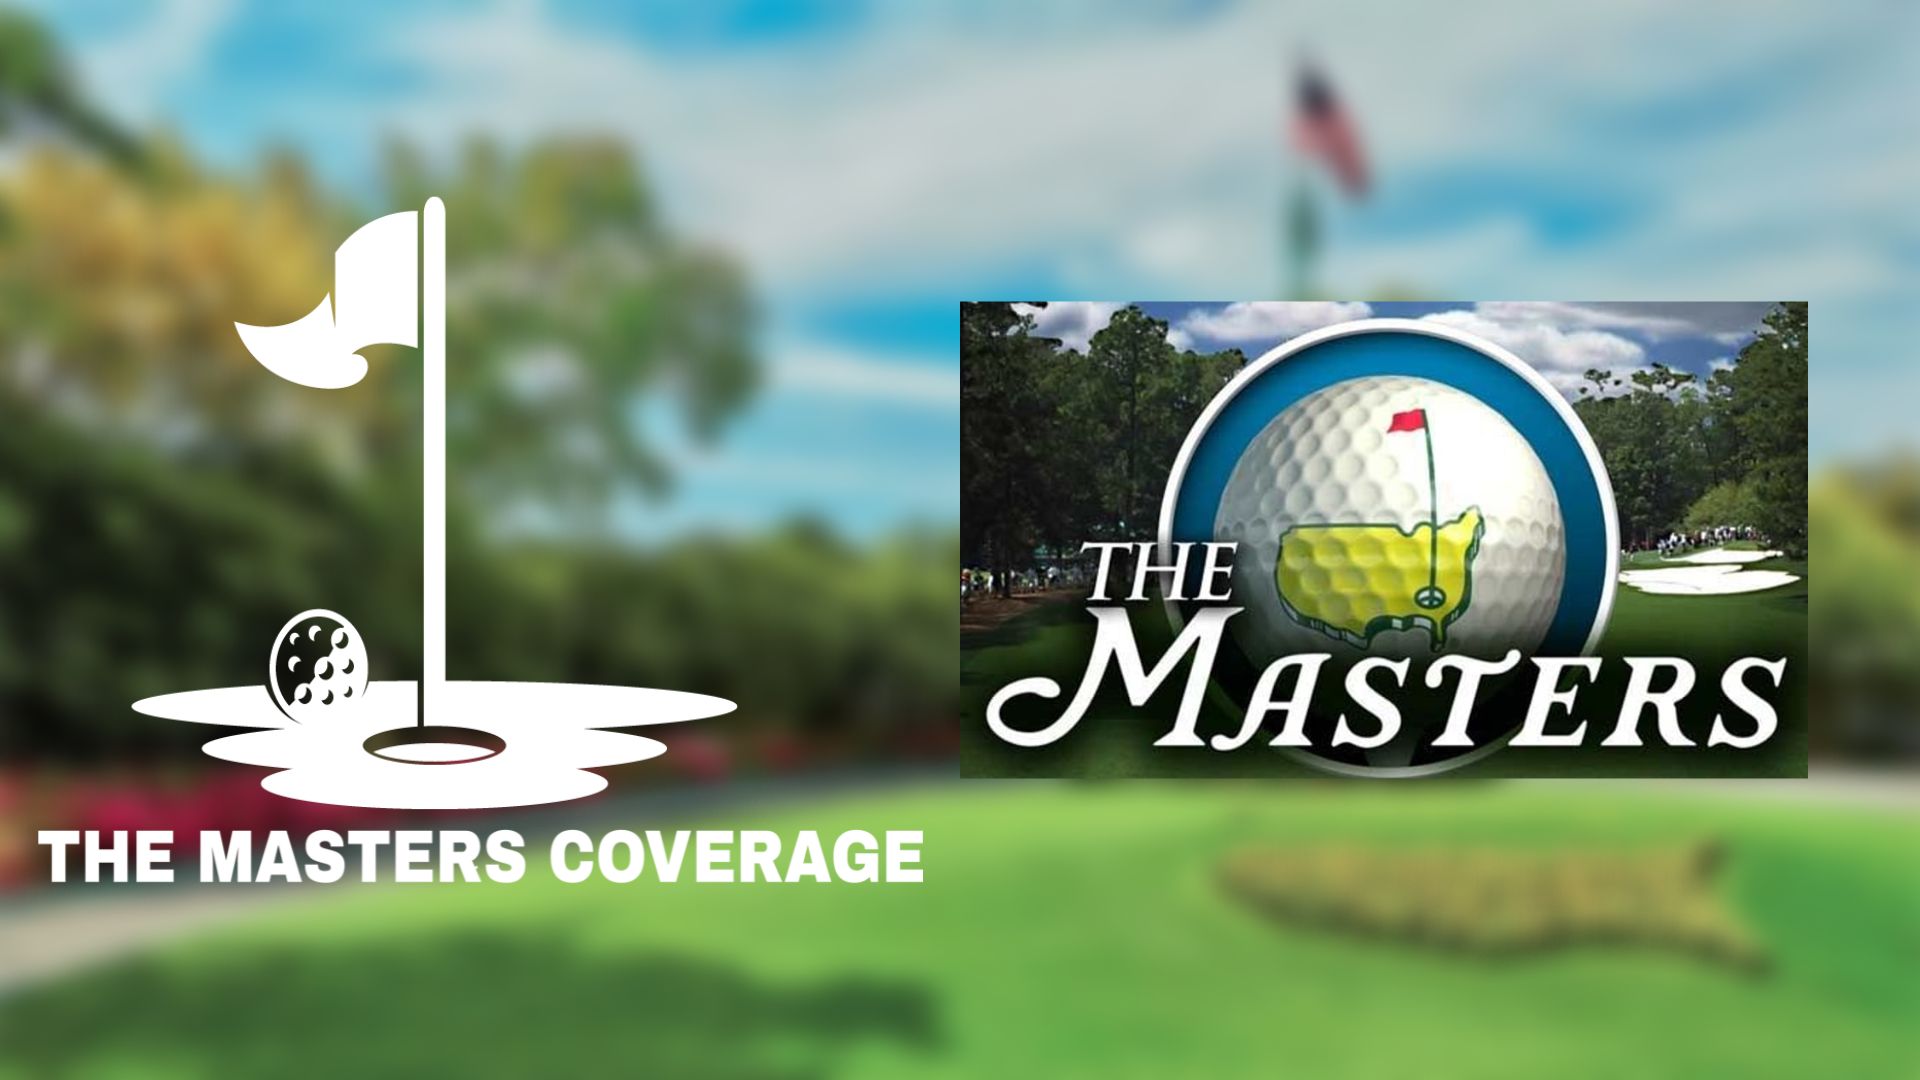 How to Watch The Masters Golf on TV